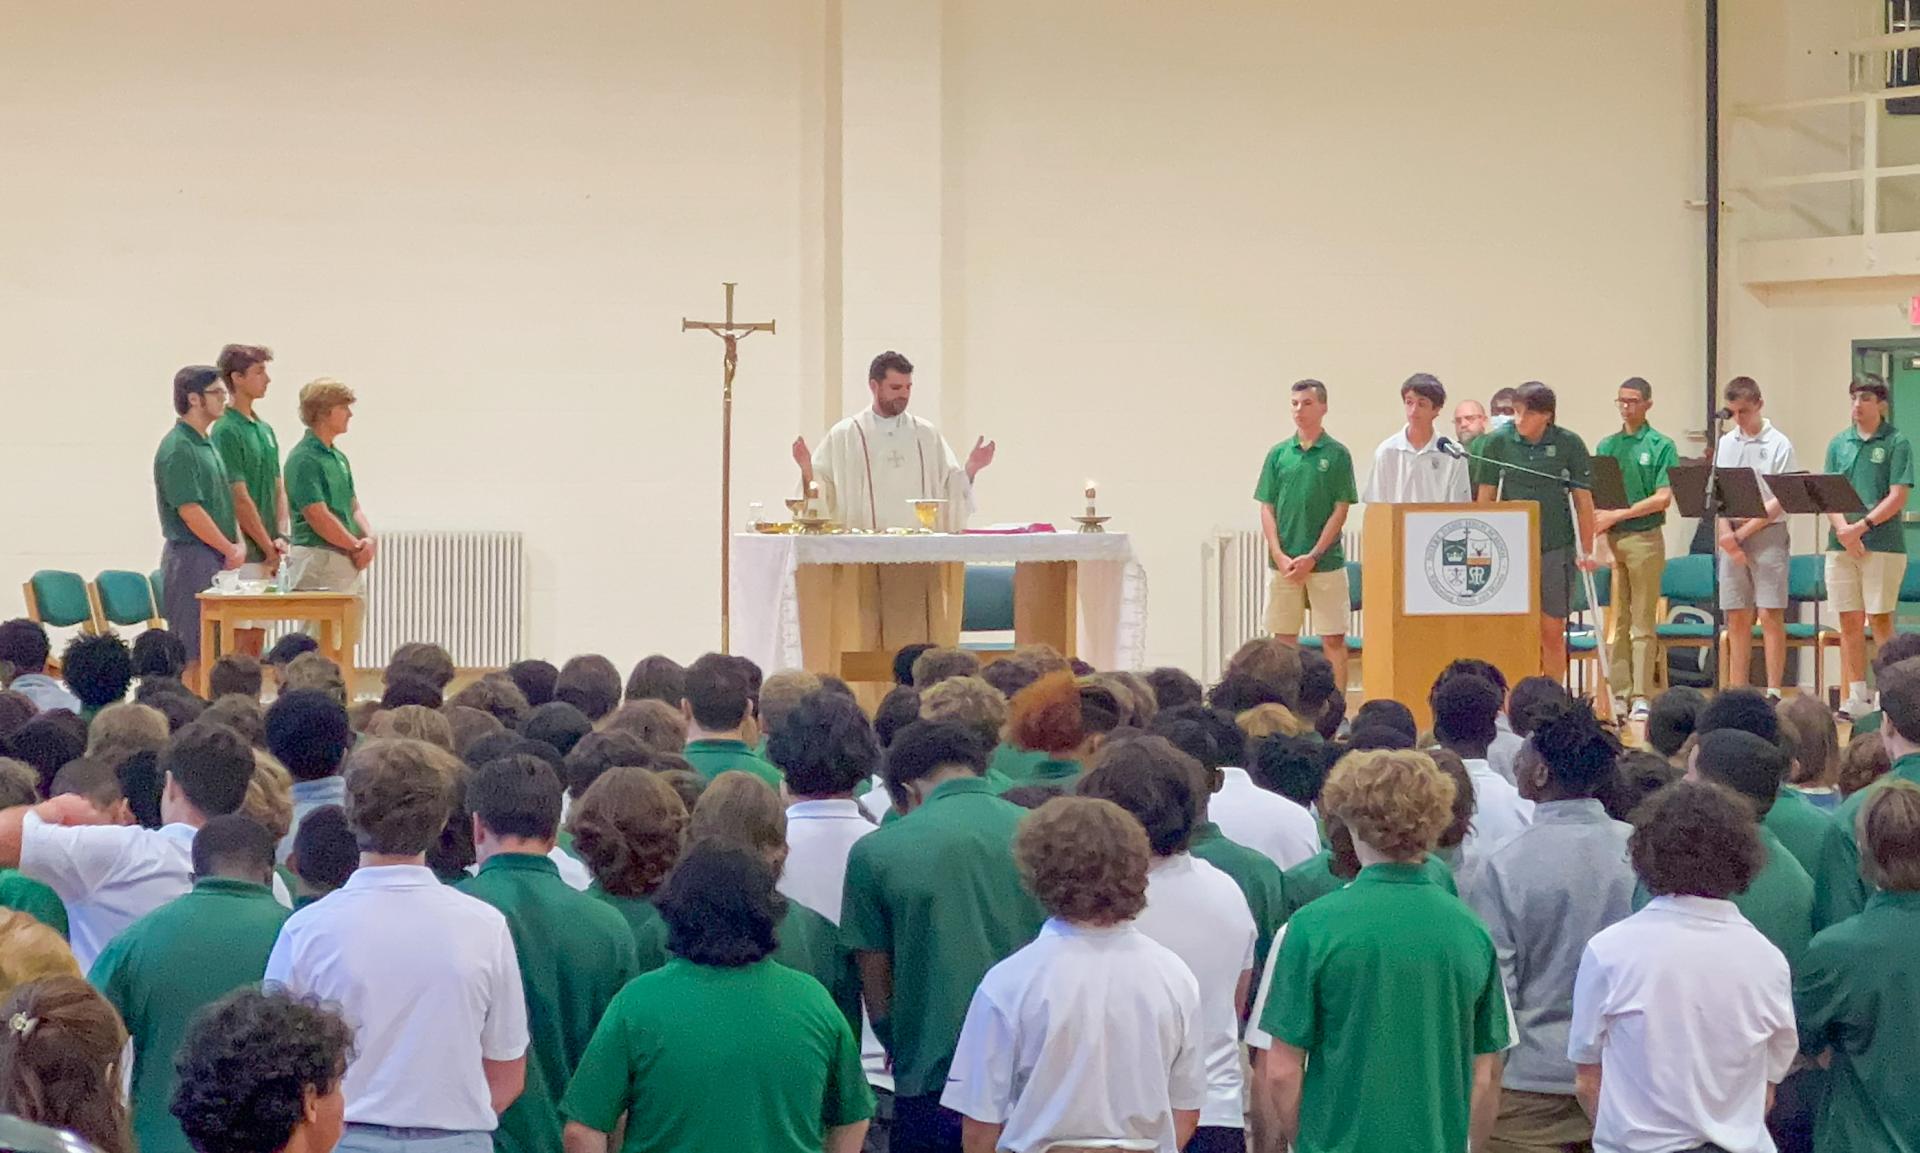 Opening School Liturgy  The Opening School Liturgy was held for all students, faculty, and staff. The celebrant was Father Anthony Federico '02. 